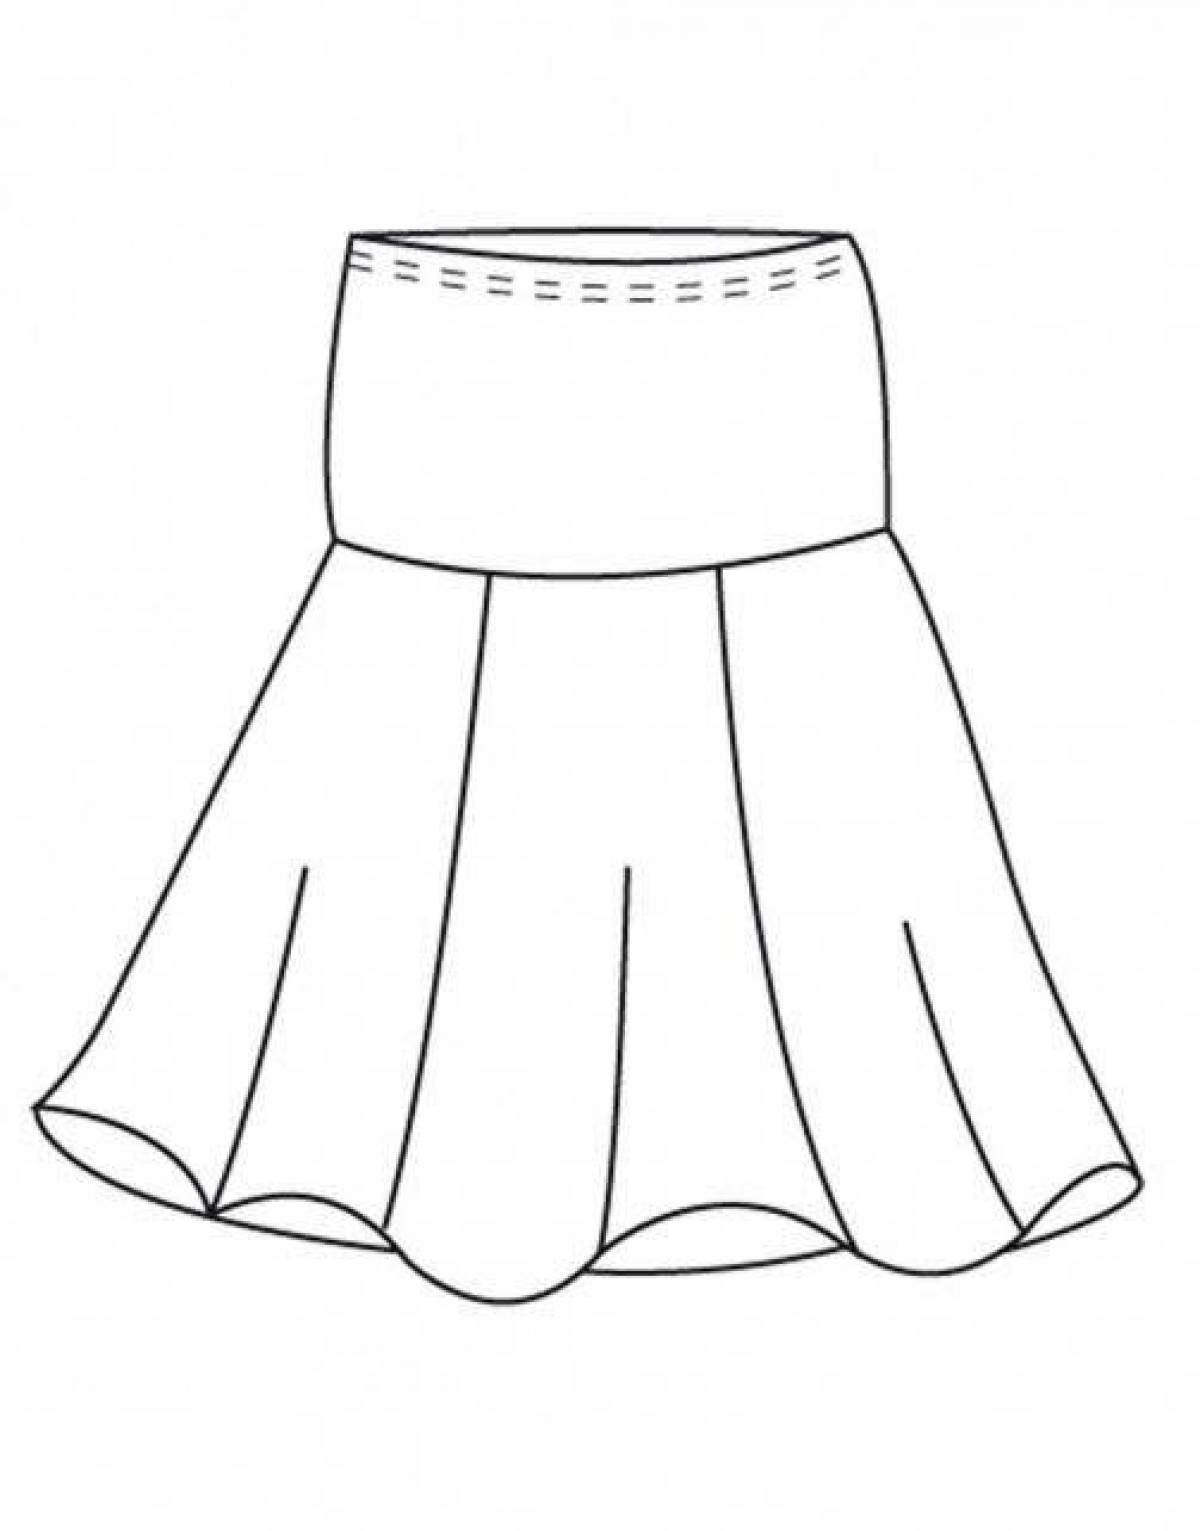 Coloring page gentle skirt